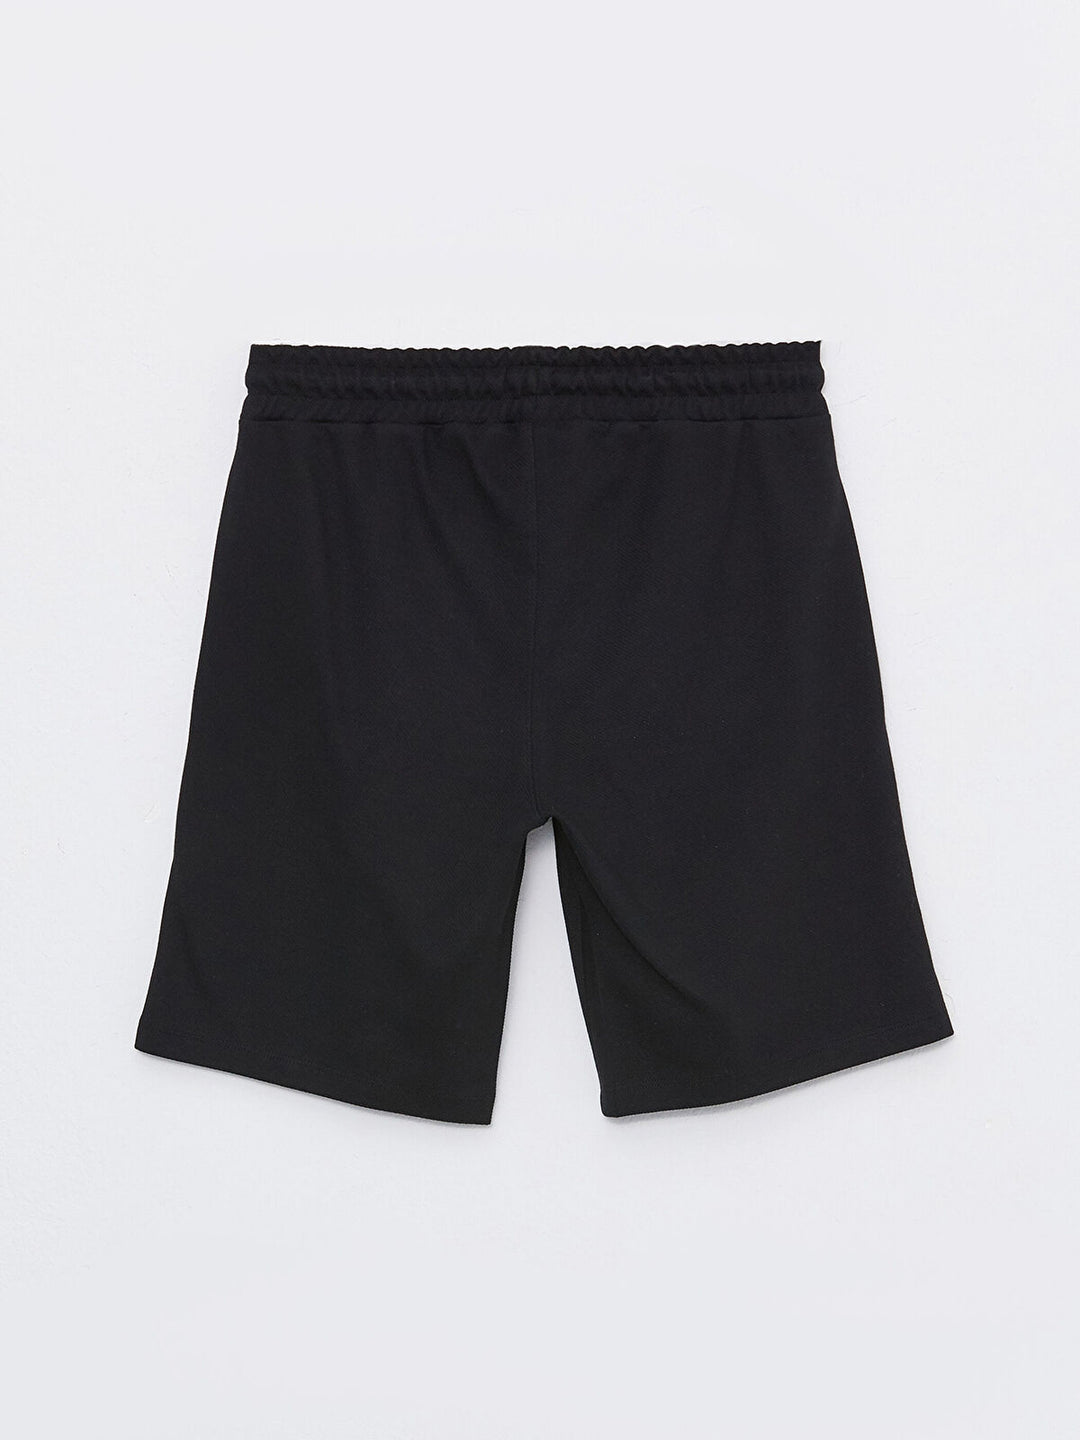 Slim Fit Knitted Men Shorts